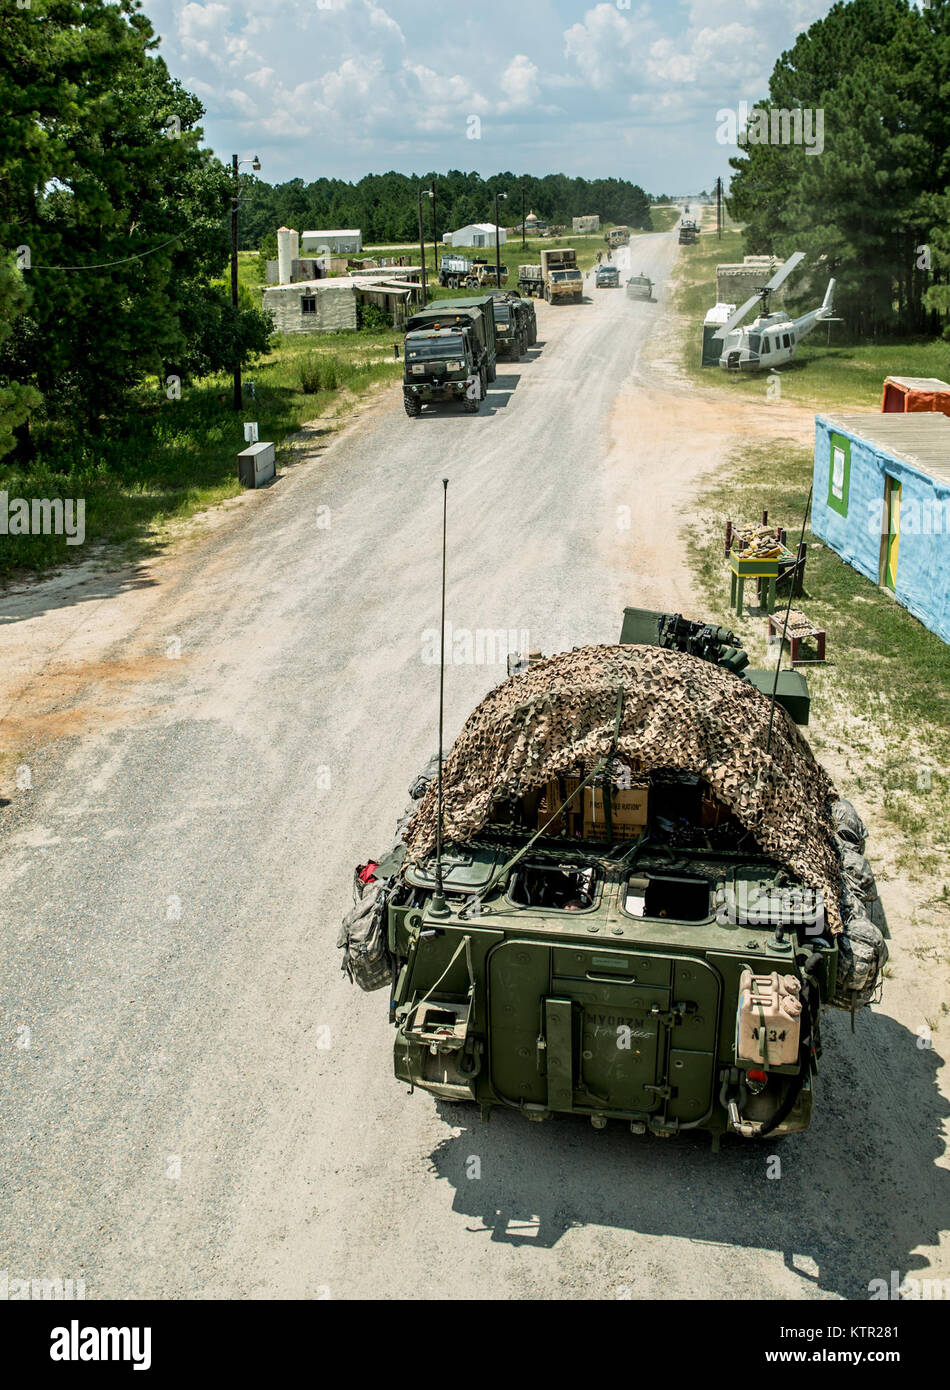 Pennsylvania Army National Guard Soldiers with Co. A, 1st Battalion, 112th Infantry defend the fictional town of Turani at the Joint Readiness Training Center, Ft. Polk, La., July 22, 2016.  The Pennsylvania Guardsmen joined over 5,000 Soldiers from other state Army National Guard units, active Army and Army Reserve troops as part of the 27th Infantry Brigade Combat Team task force.  The Soldiers are honing their skills and practicing integrating combat operations ranging from infantry troops engaging in close combat with an enemy to artillery and air strikes, July 9-30, 2016. (U.S. Army Natio Stock Photo